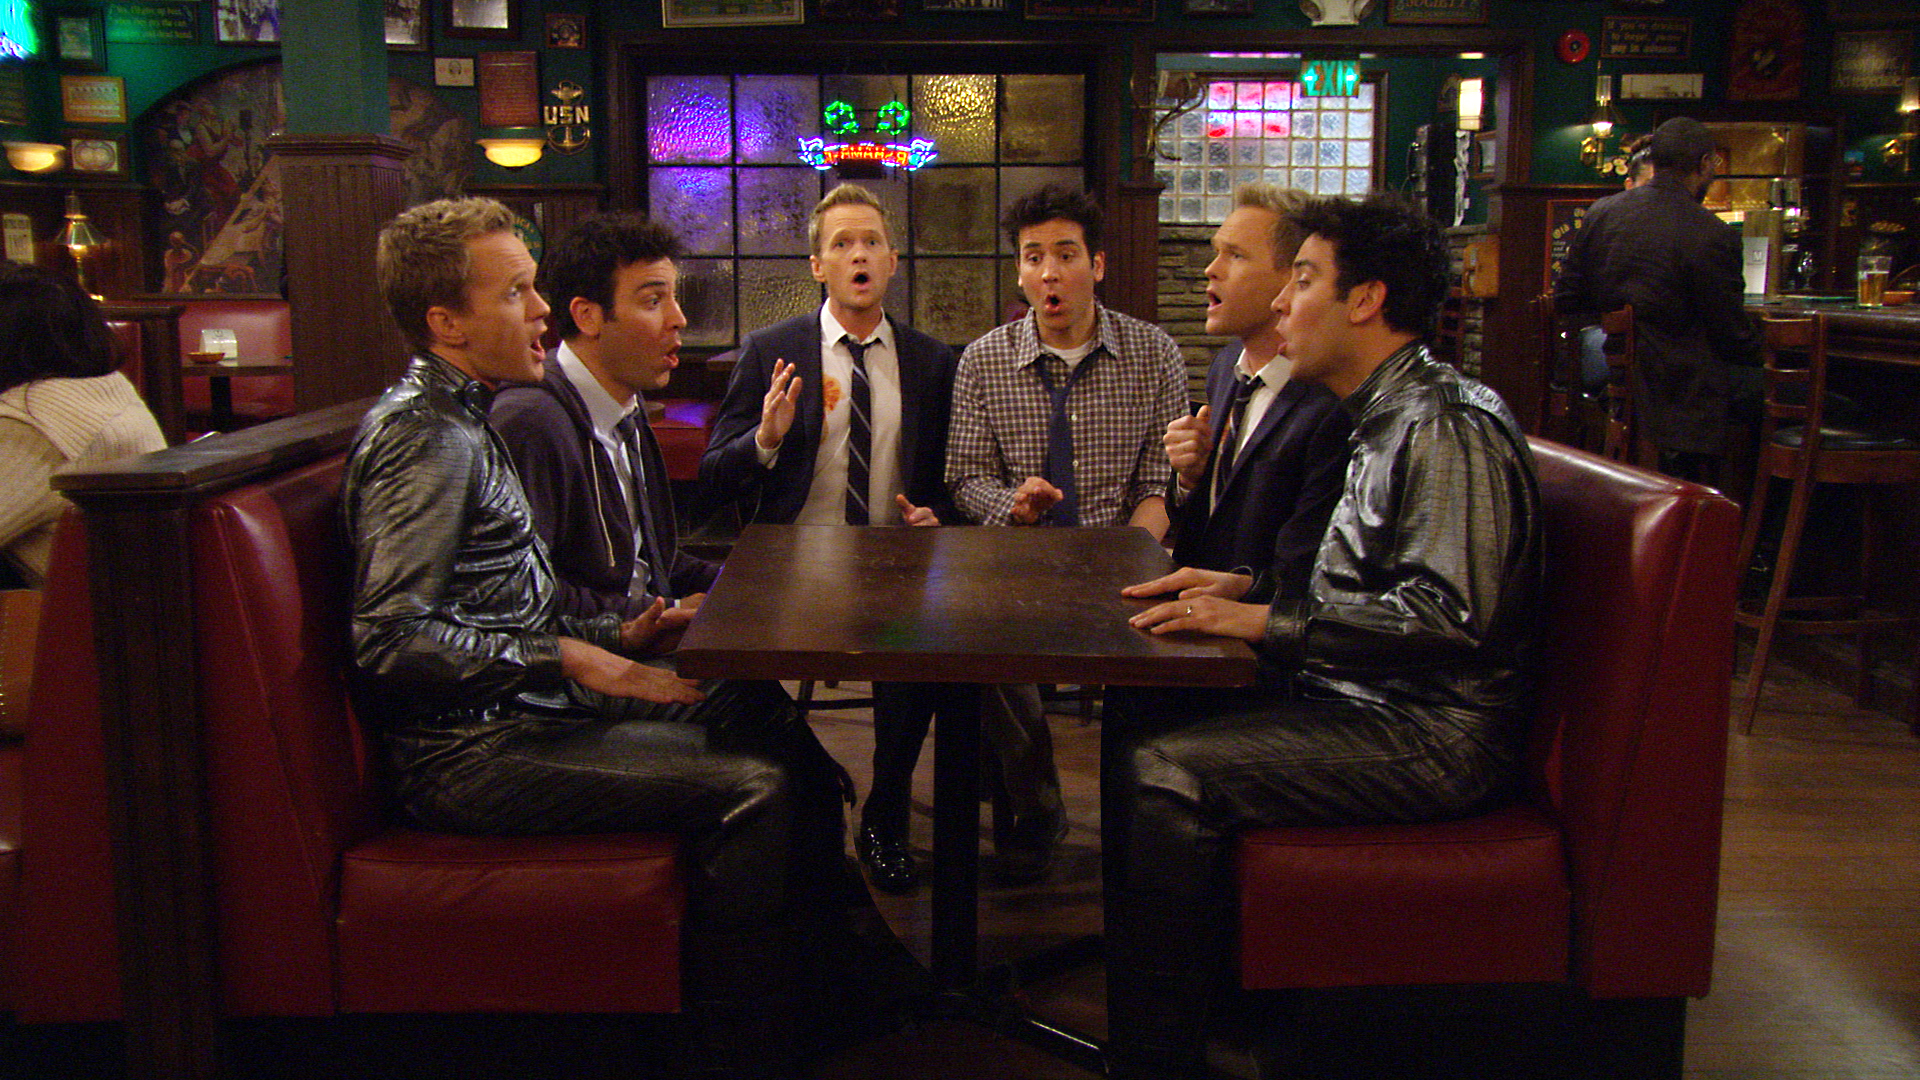 Himym Time Travelers - HD Wallpaper 